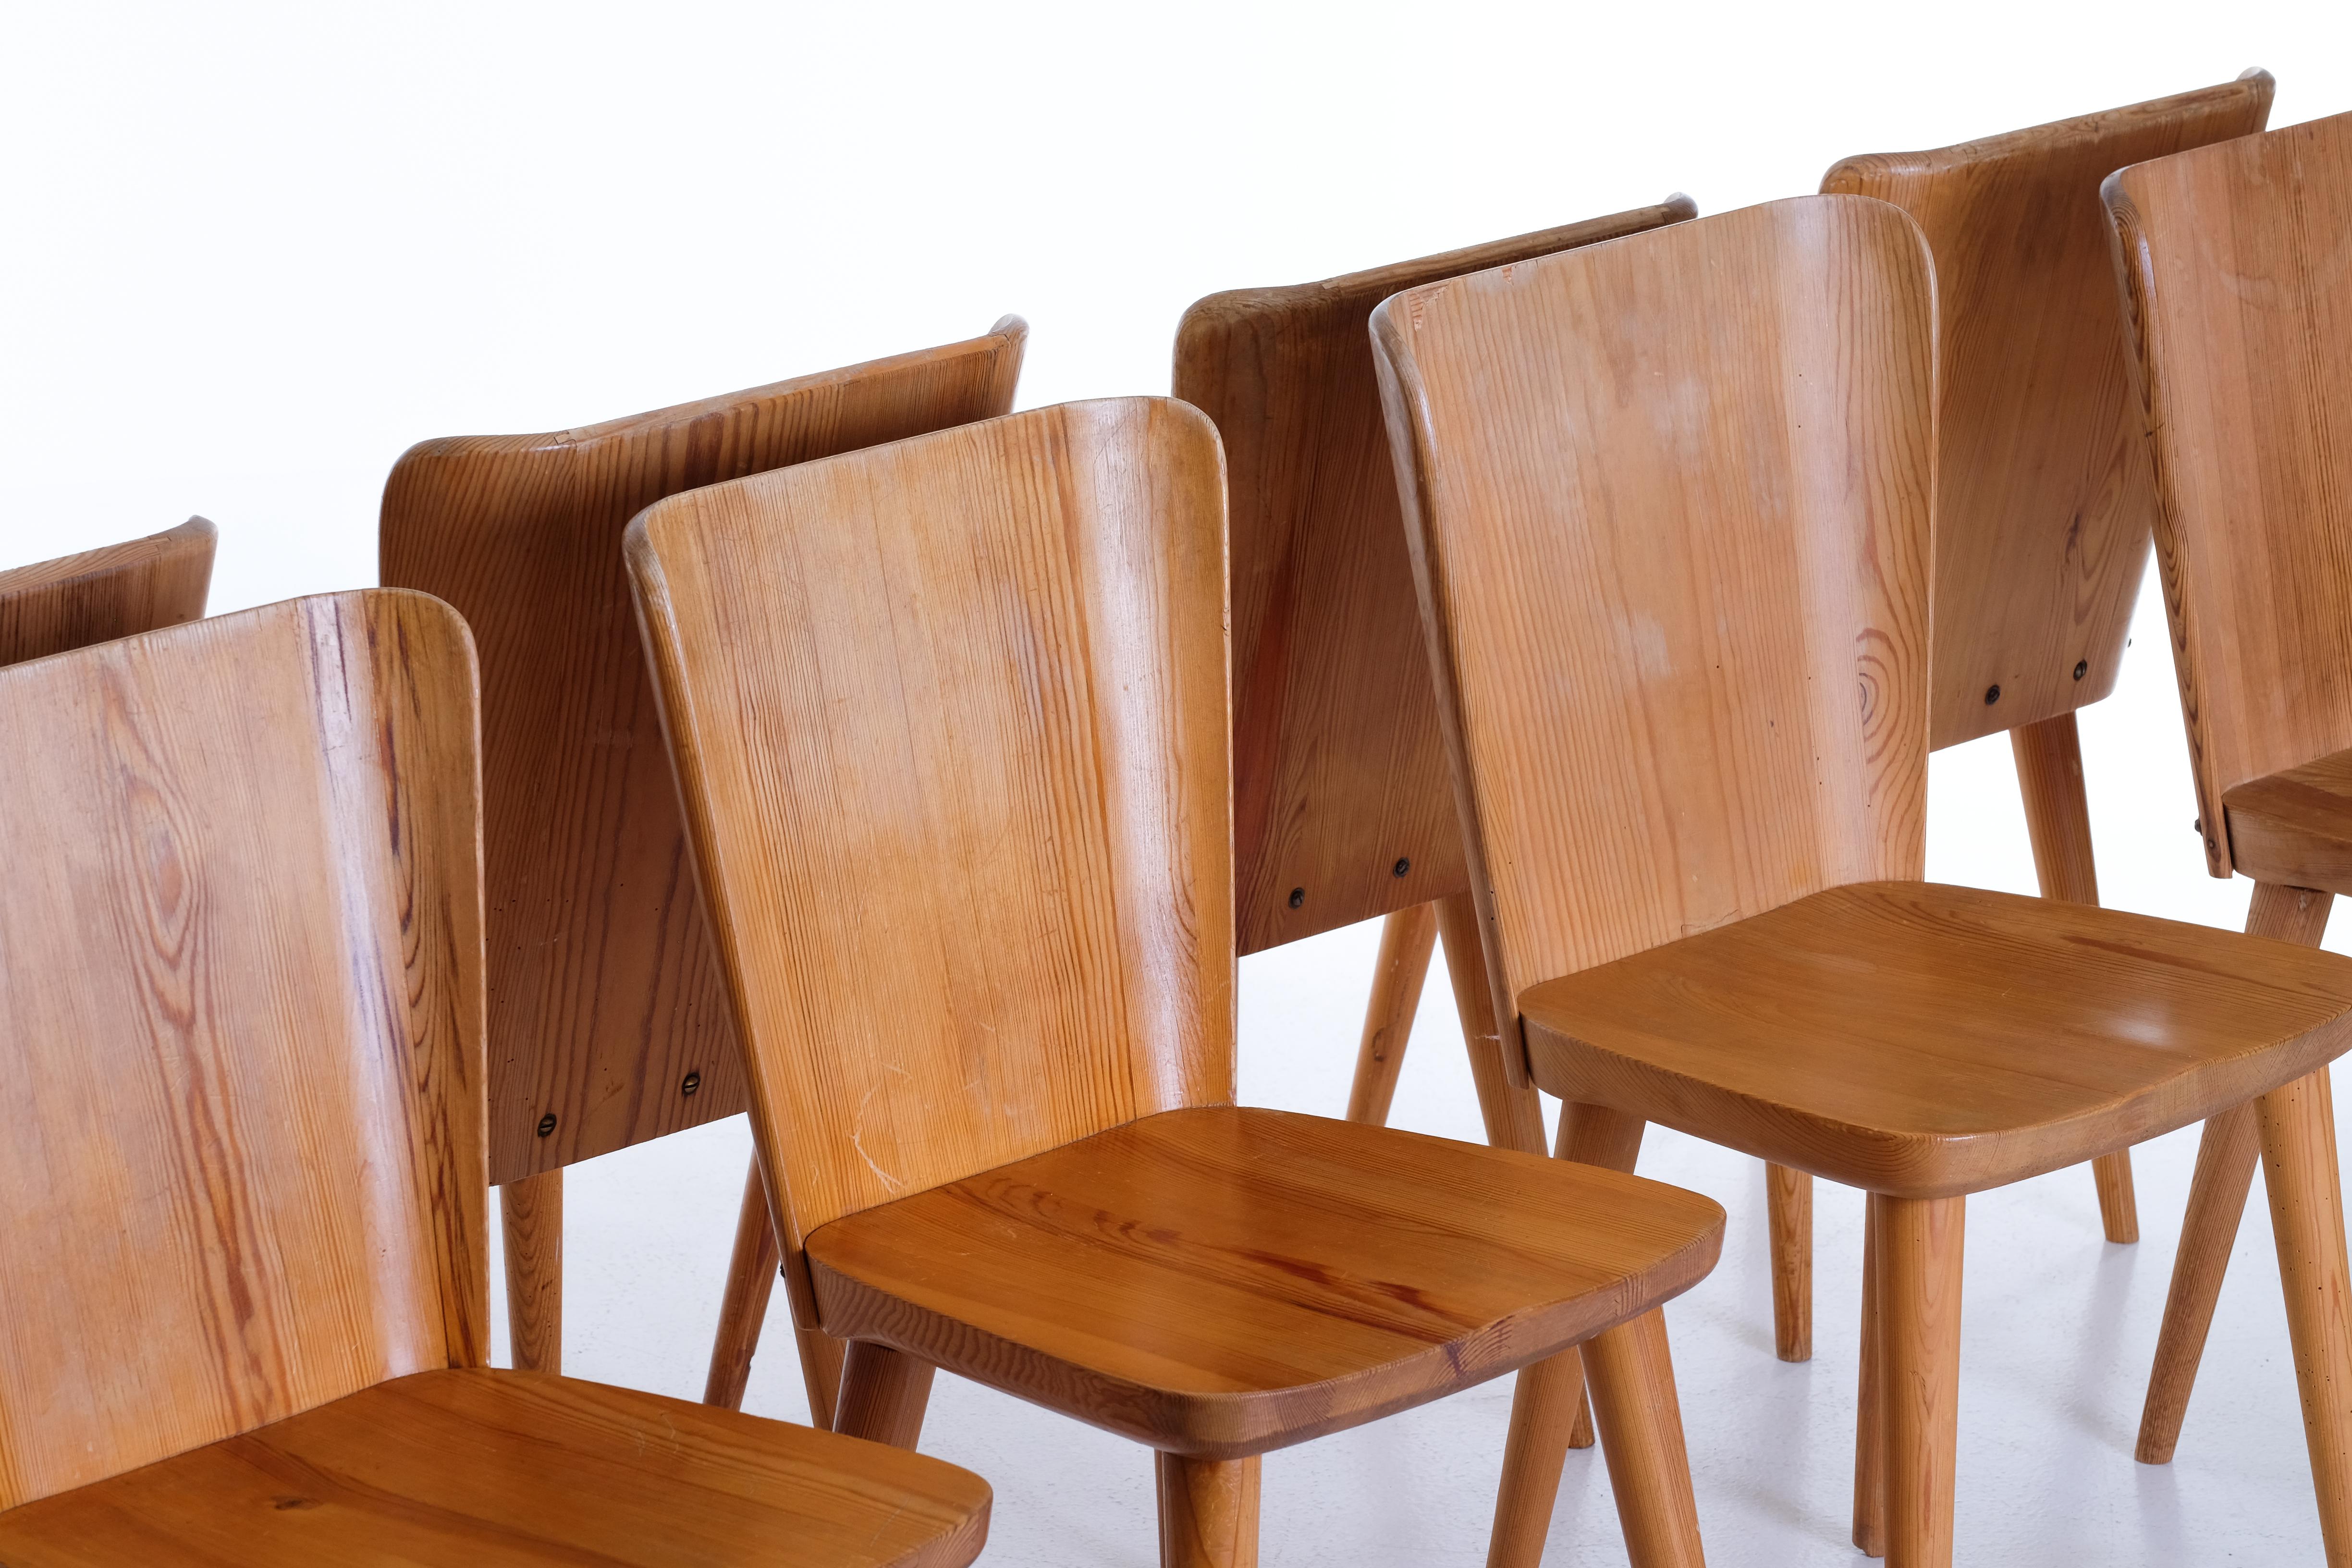 Mid-20th Century Set of 8 Swedish Pine Chairs by Göran Malmvall, Svensk Fur, 1950s For Sale